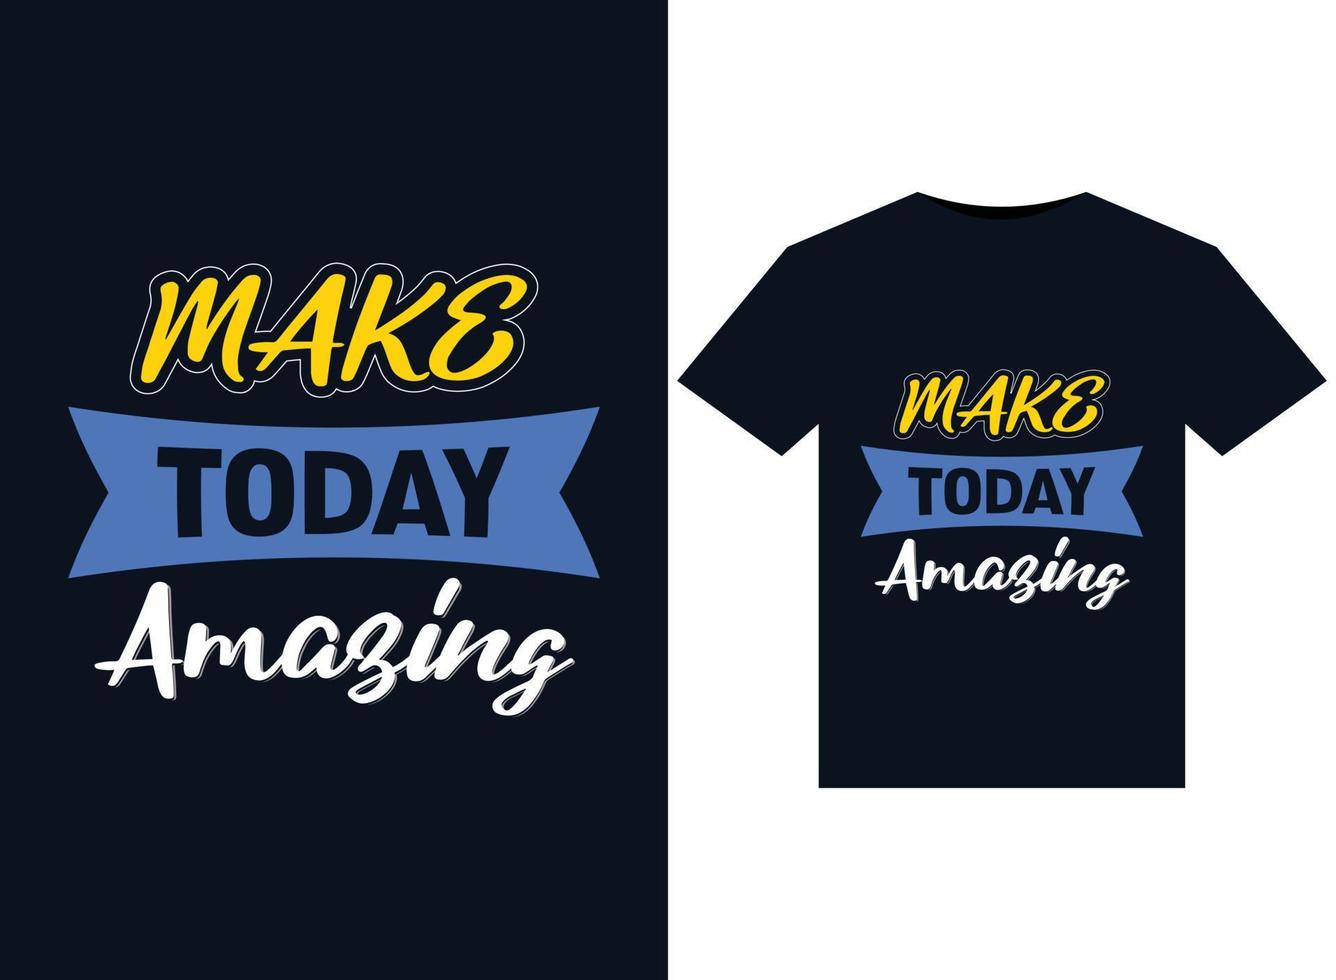 Make today amazing illustrations for print-ready T-Shirts design vector